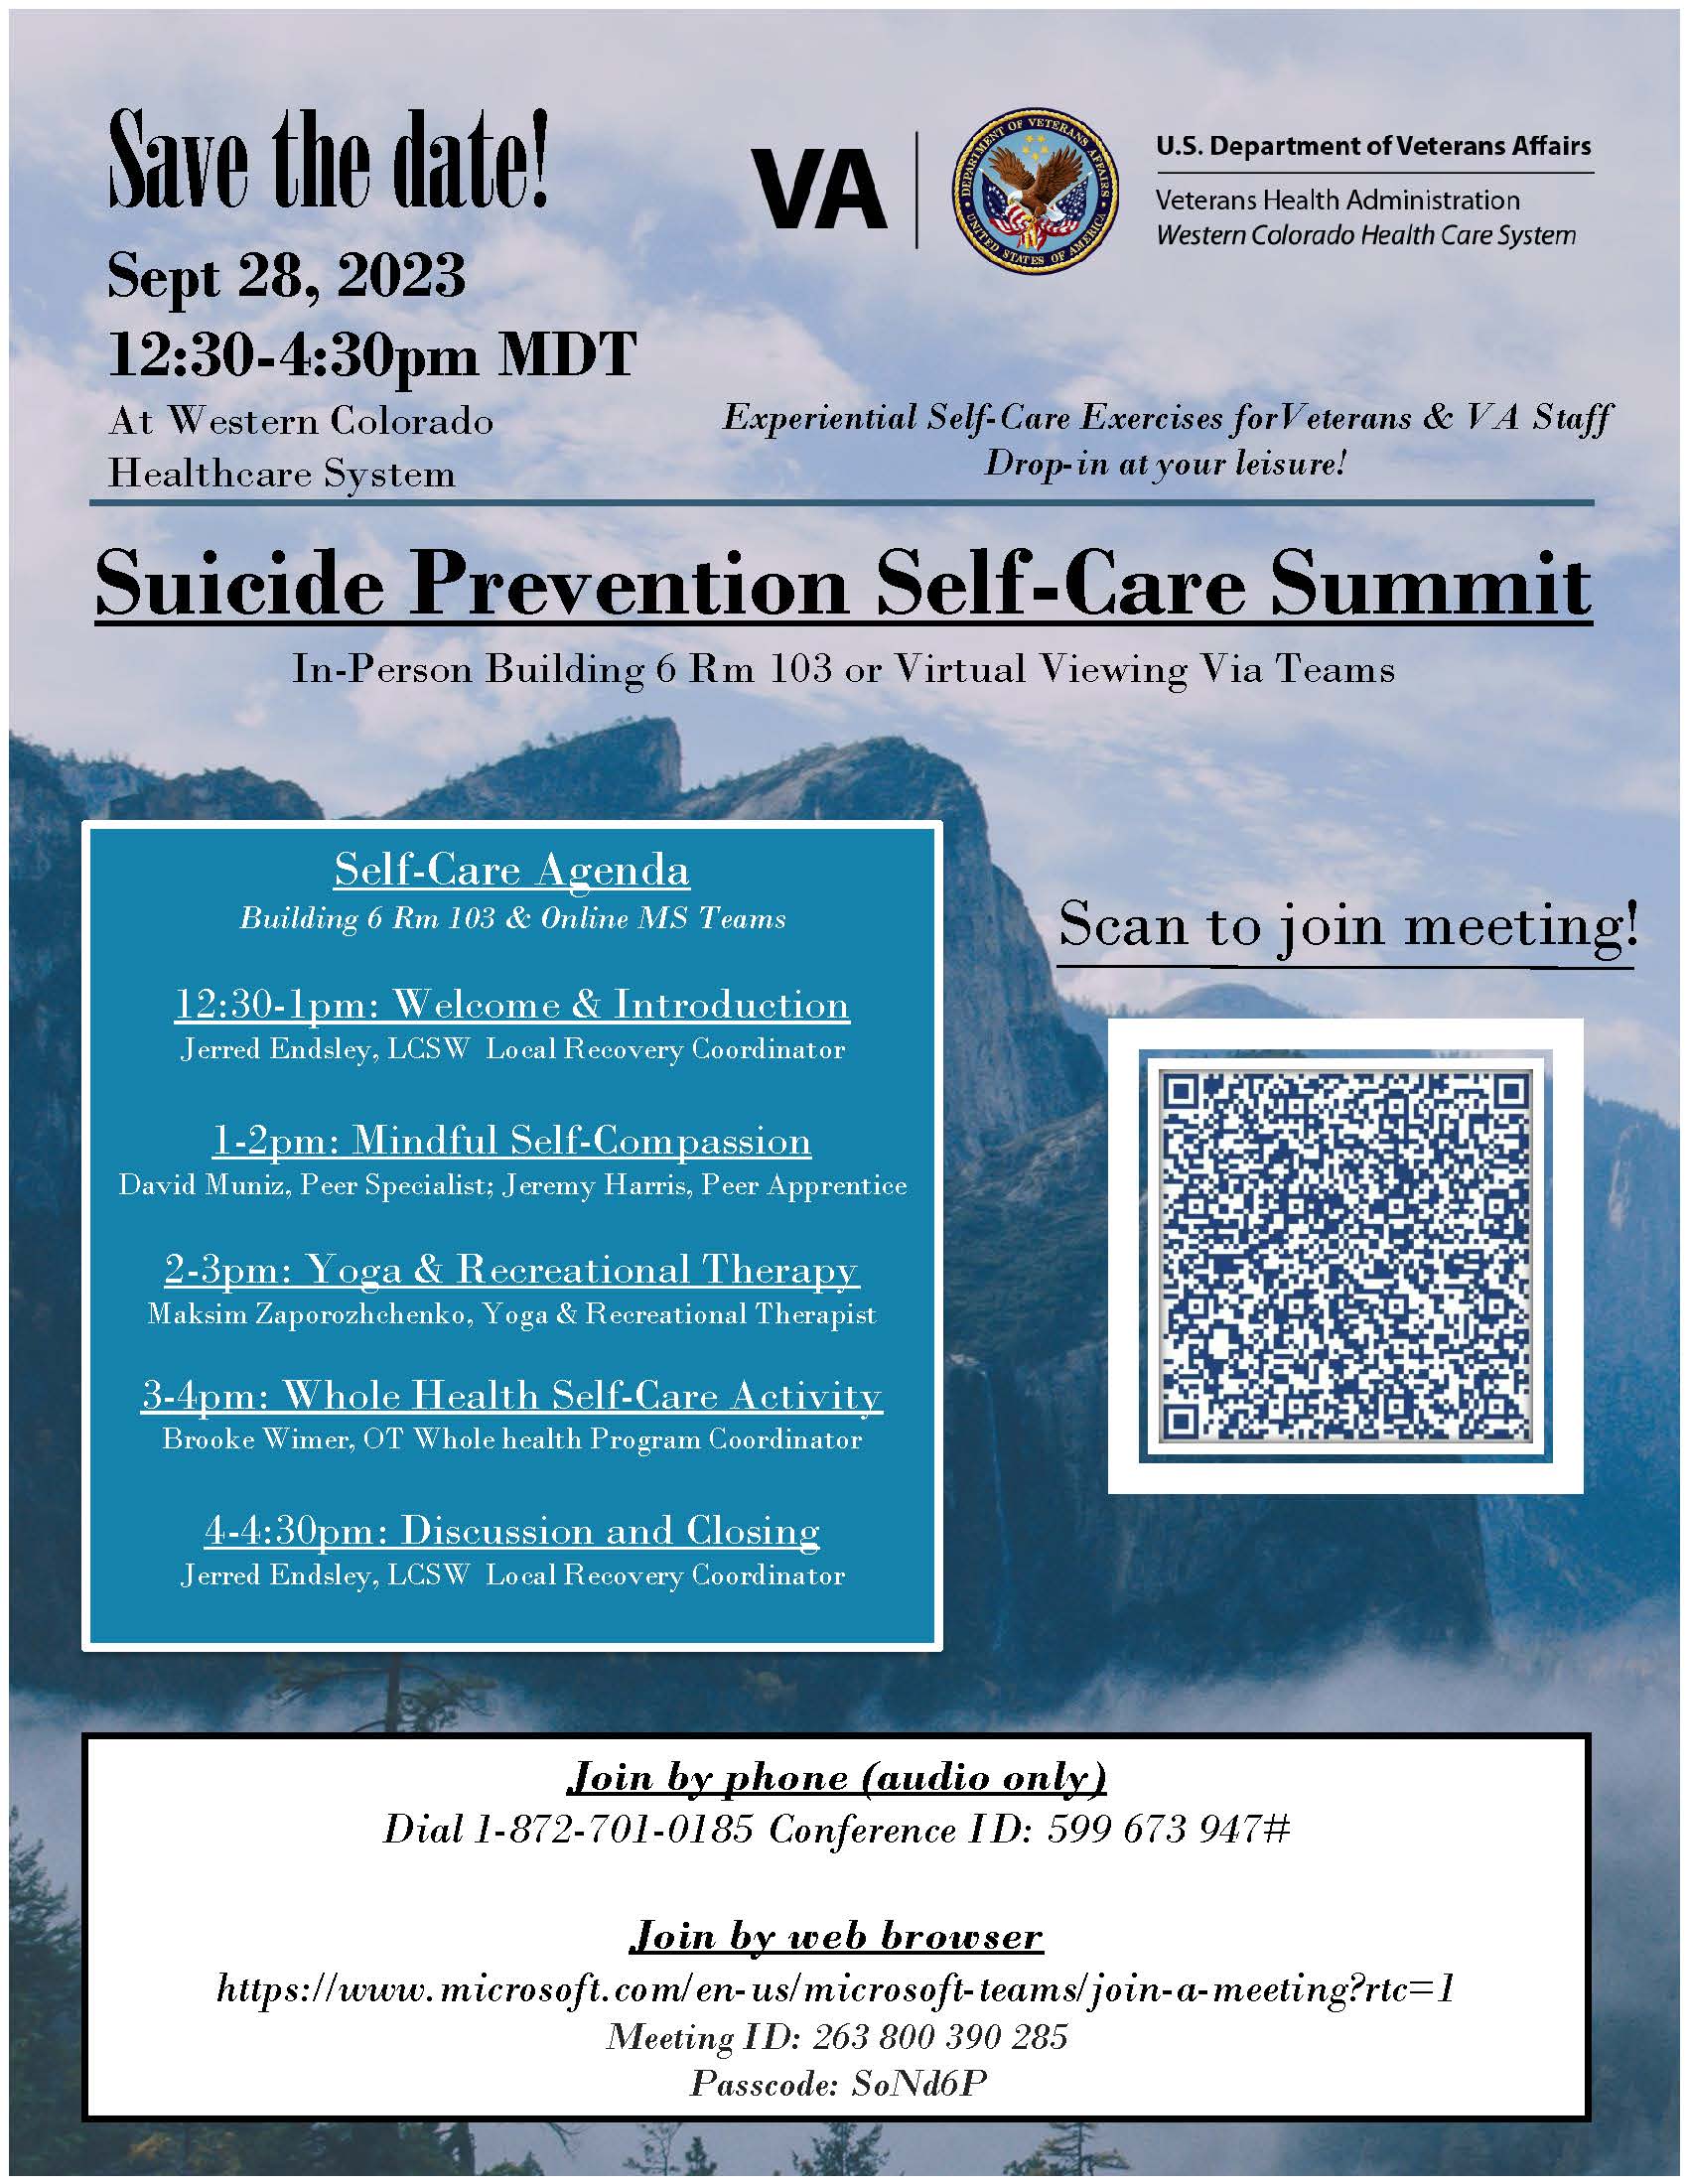 Suicide Prevention Self-Care Summit flyer